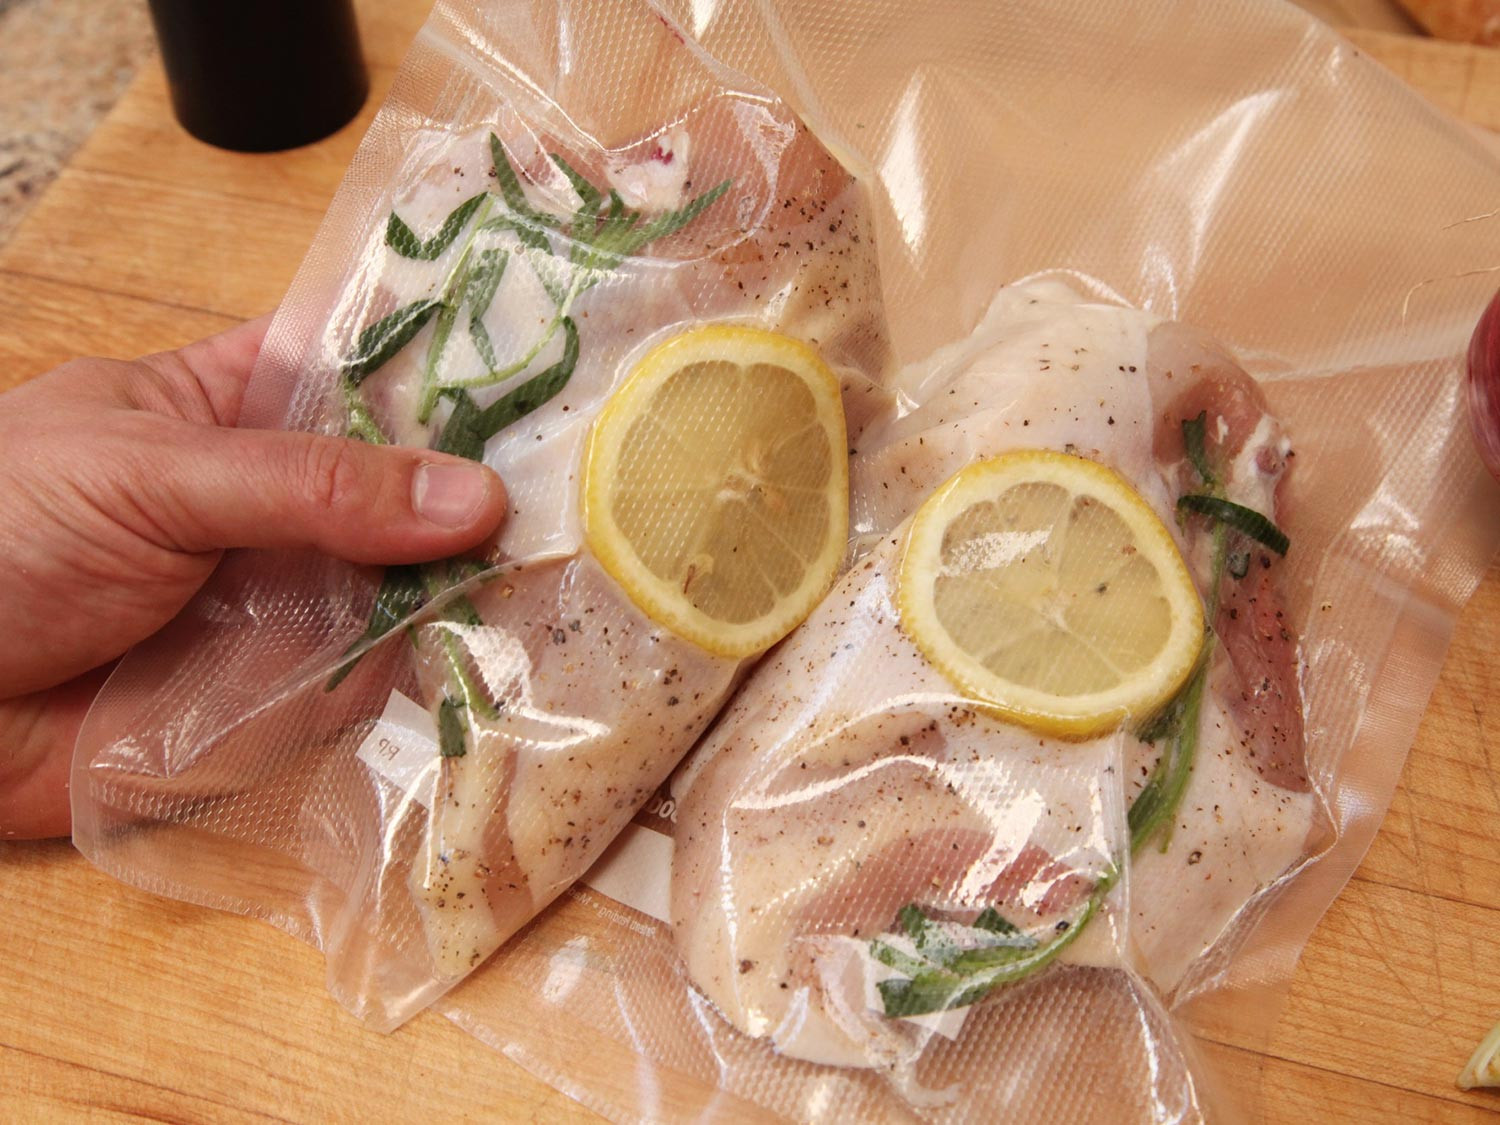 Sous Vide Whole Chicken
 Use Your Sous Vide Cooker for the Juiciest Most Flavorful